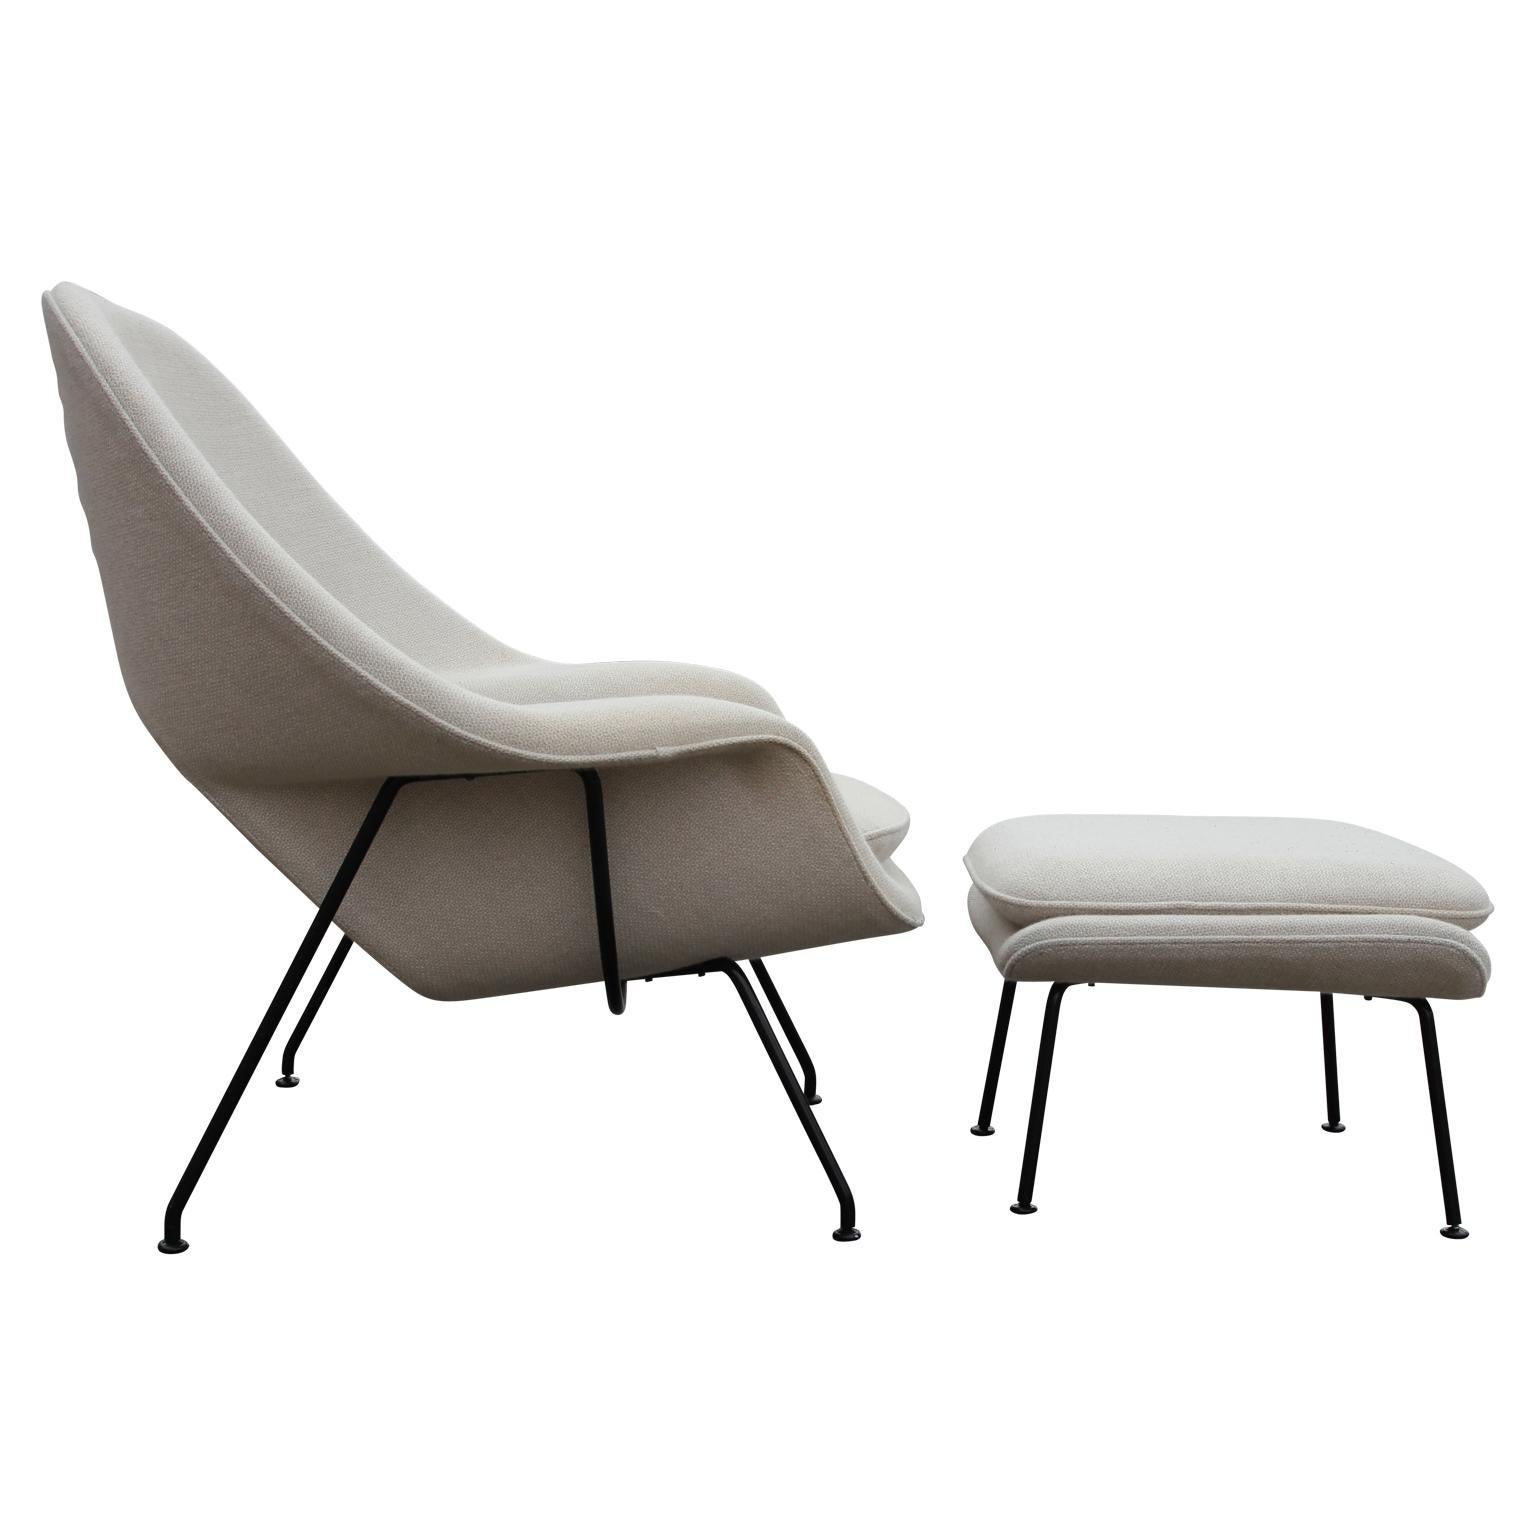 Modern white womb chair and ottoman designed by Eero Saarinen for Knoll. The chair still has the original wool fabric that is in decent shape.
- circa 1980s
- Black steel

Dimensions of ottoman: H 14 in x W 25 in x D 22 in.